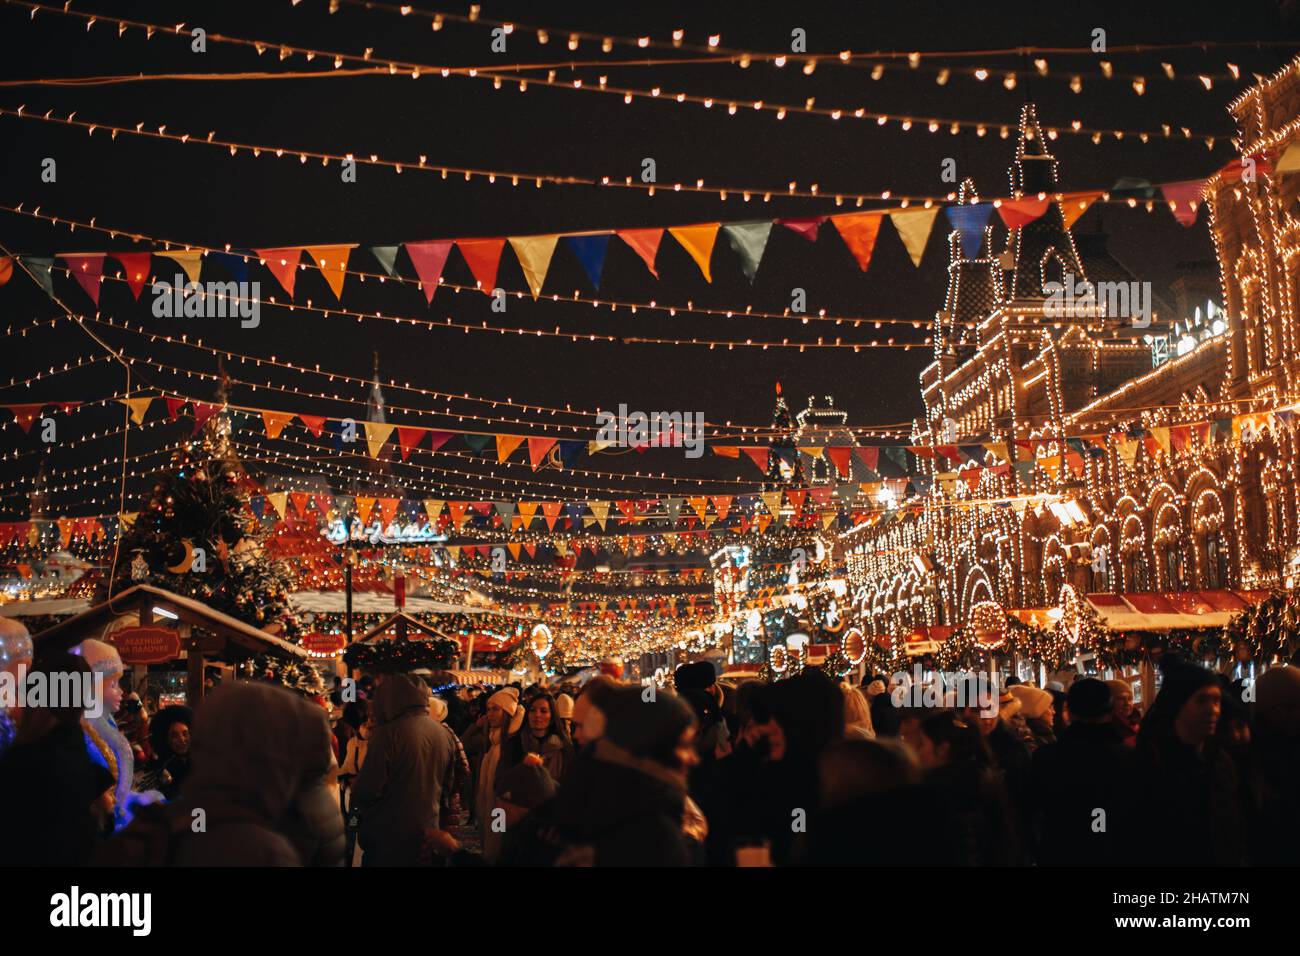 A crowd of people walking in the evening at the famous Christmas fair in the center of Moscow decorated with festive golden garlands. Magic atmosphere Stock Photo